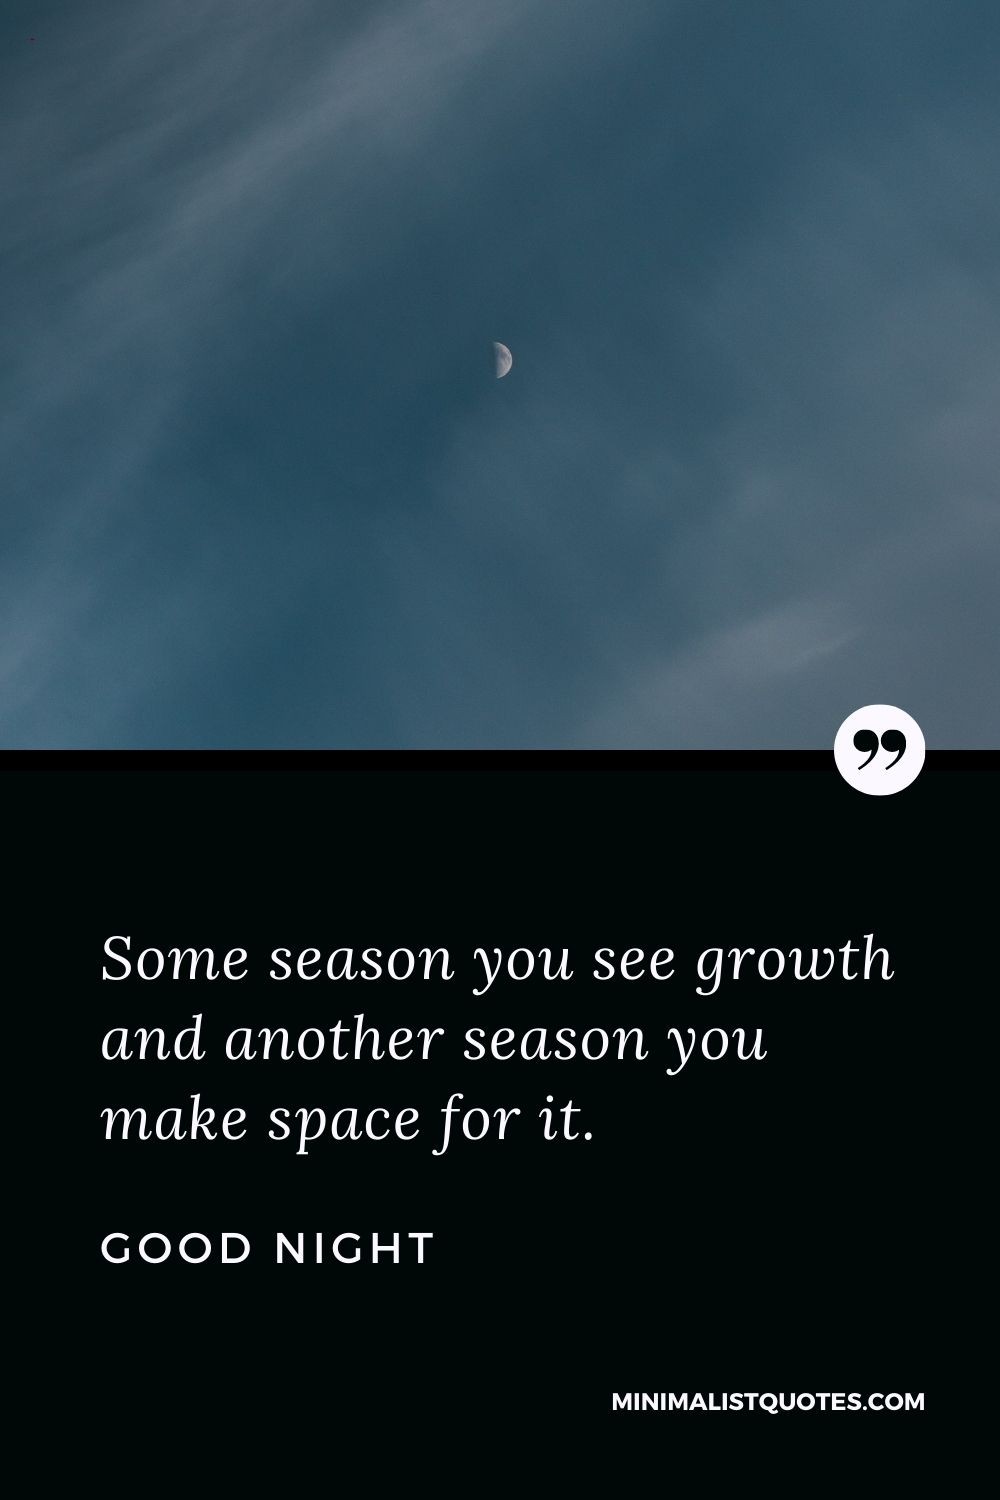 Good Night Wishes - Some season you see growth and another season you make space for it.